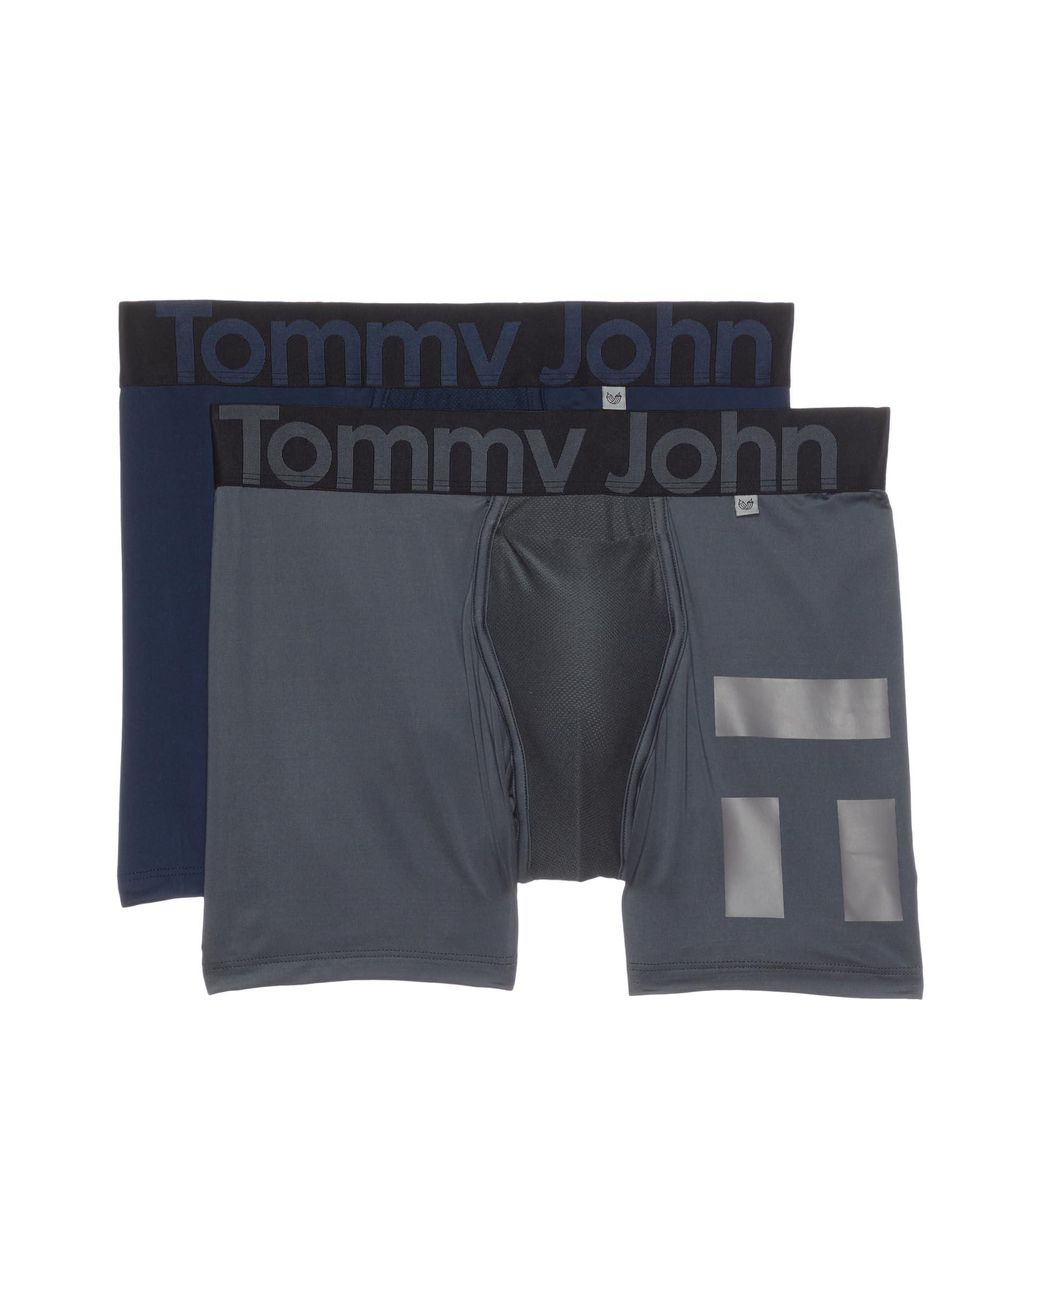 Tommy John 360 Sport Hammock Pouch 4 Boxer Brief 2-pack in Blue